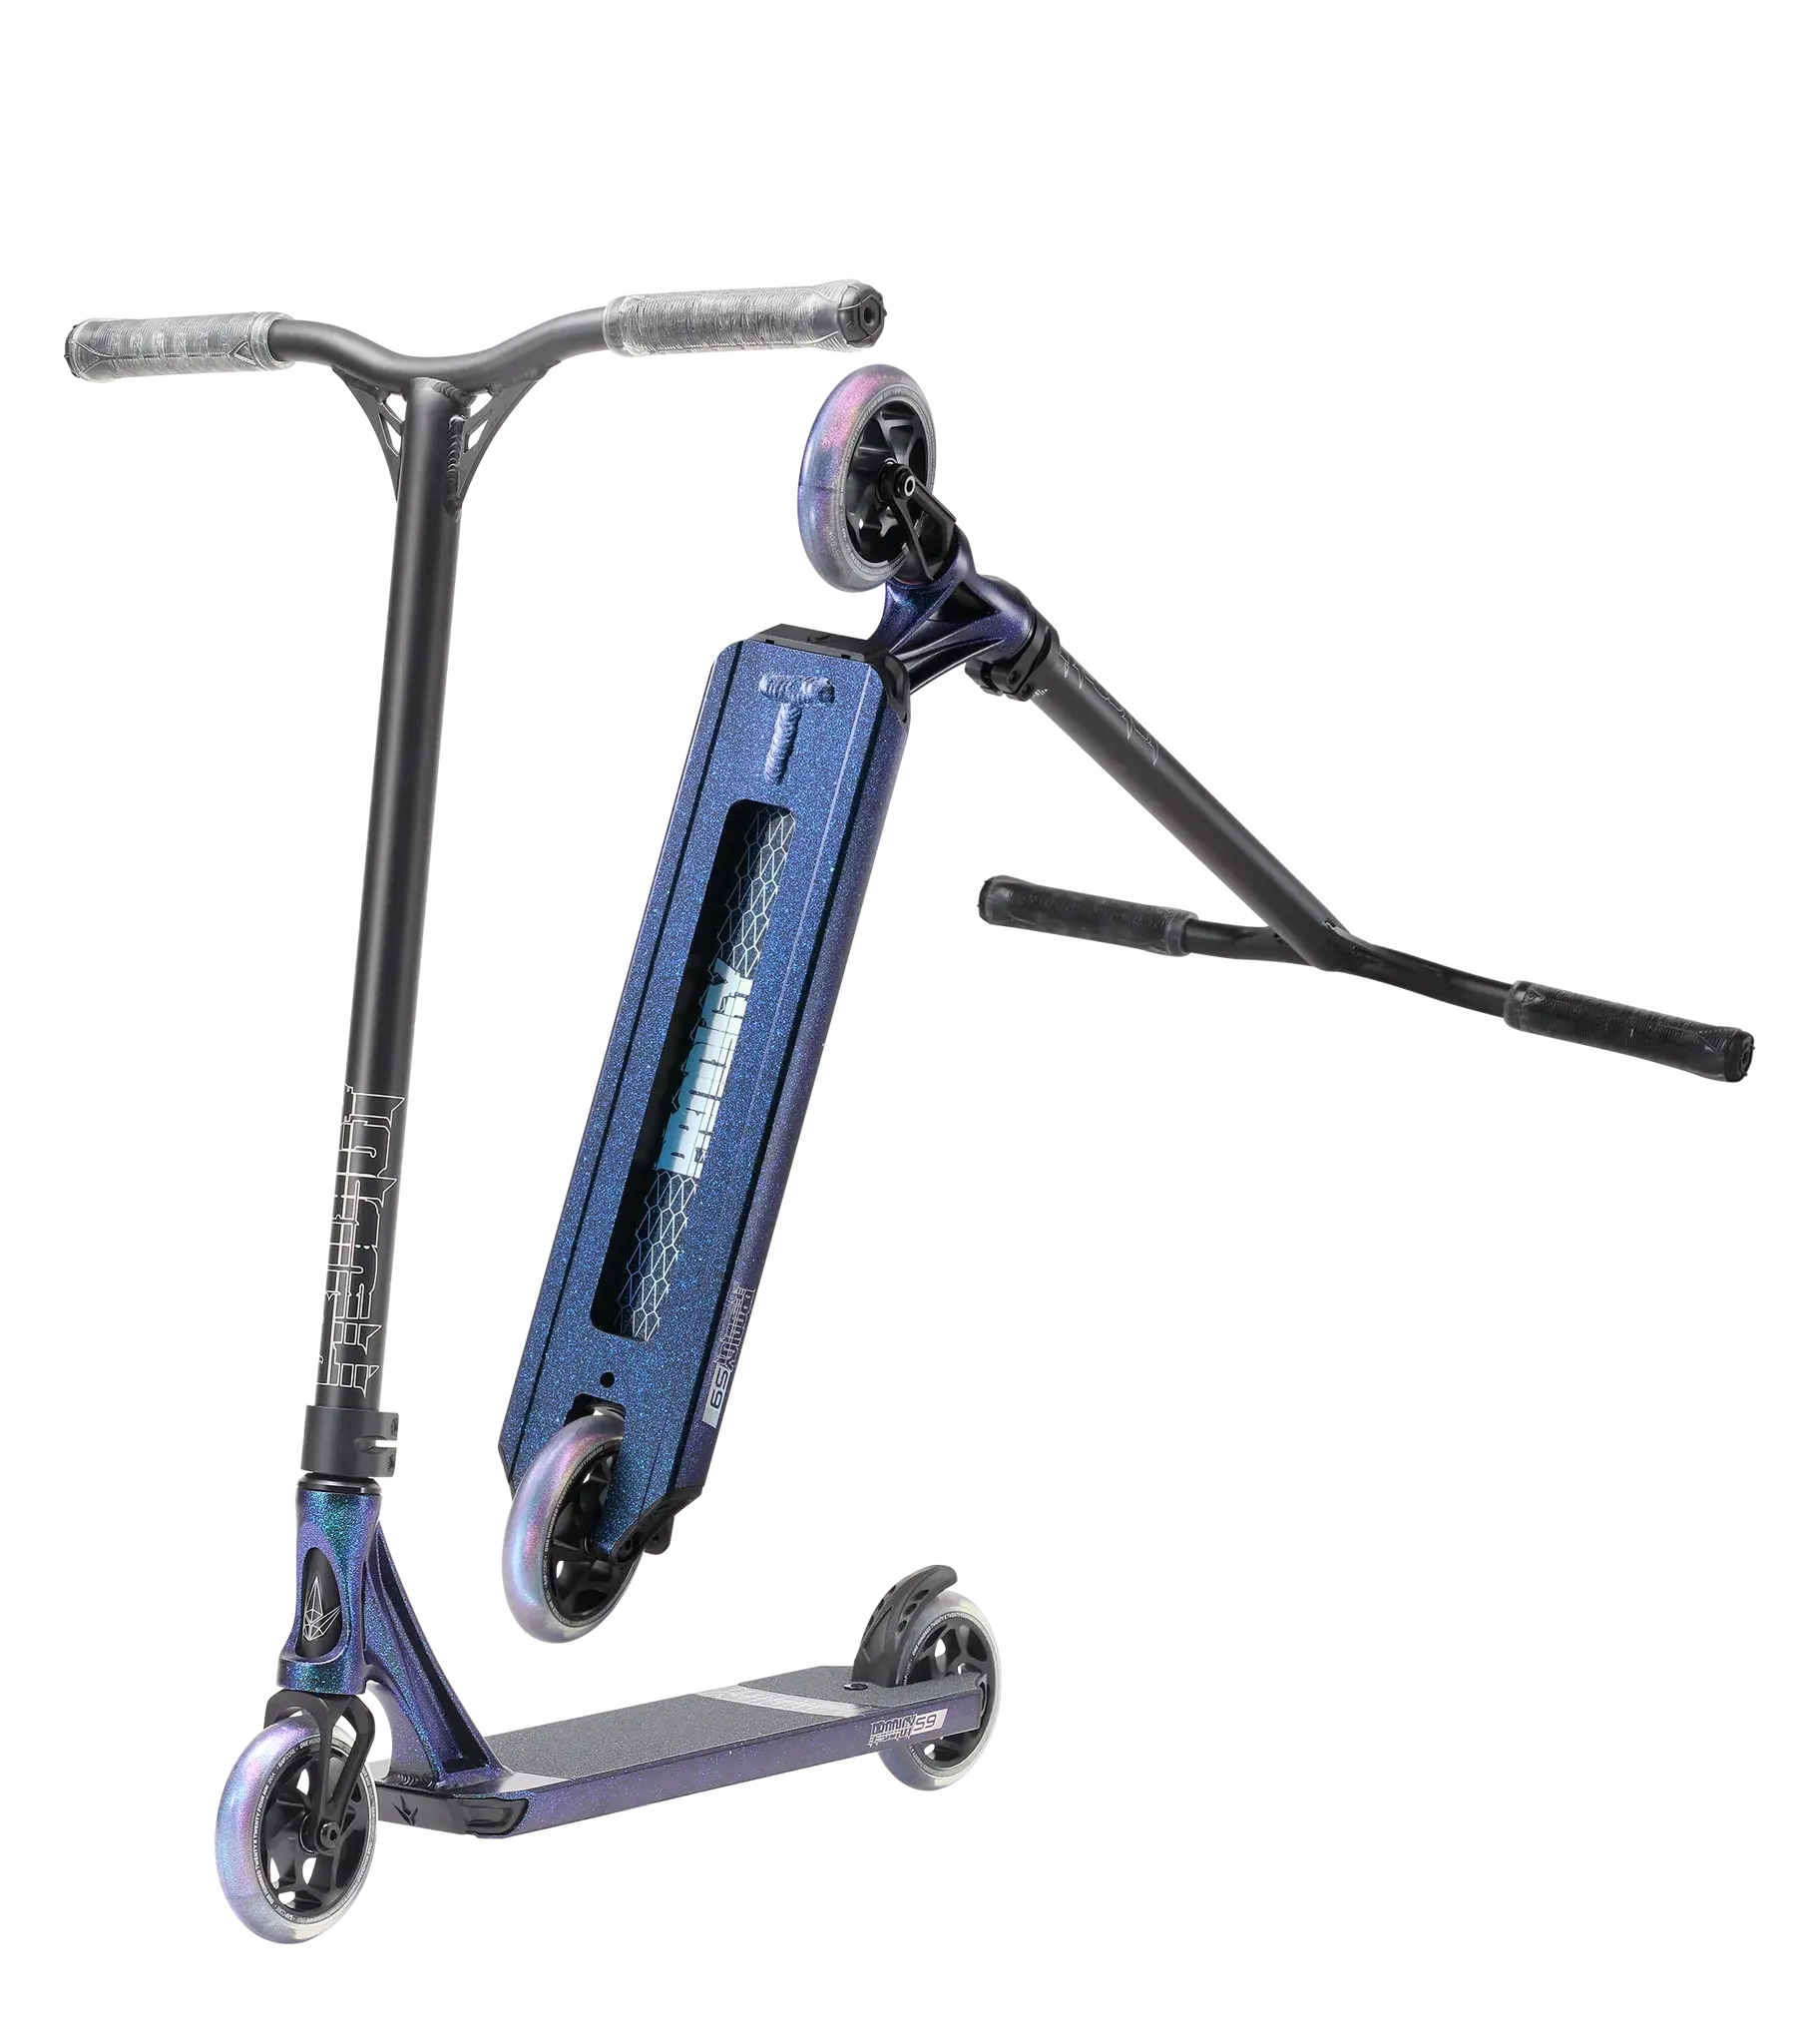 Envy Prodigy S9 Complete Pro Scooter - Galaxy ENVY